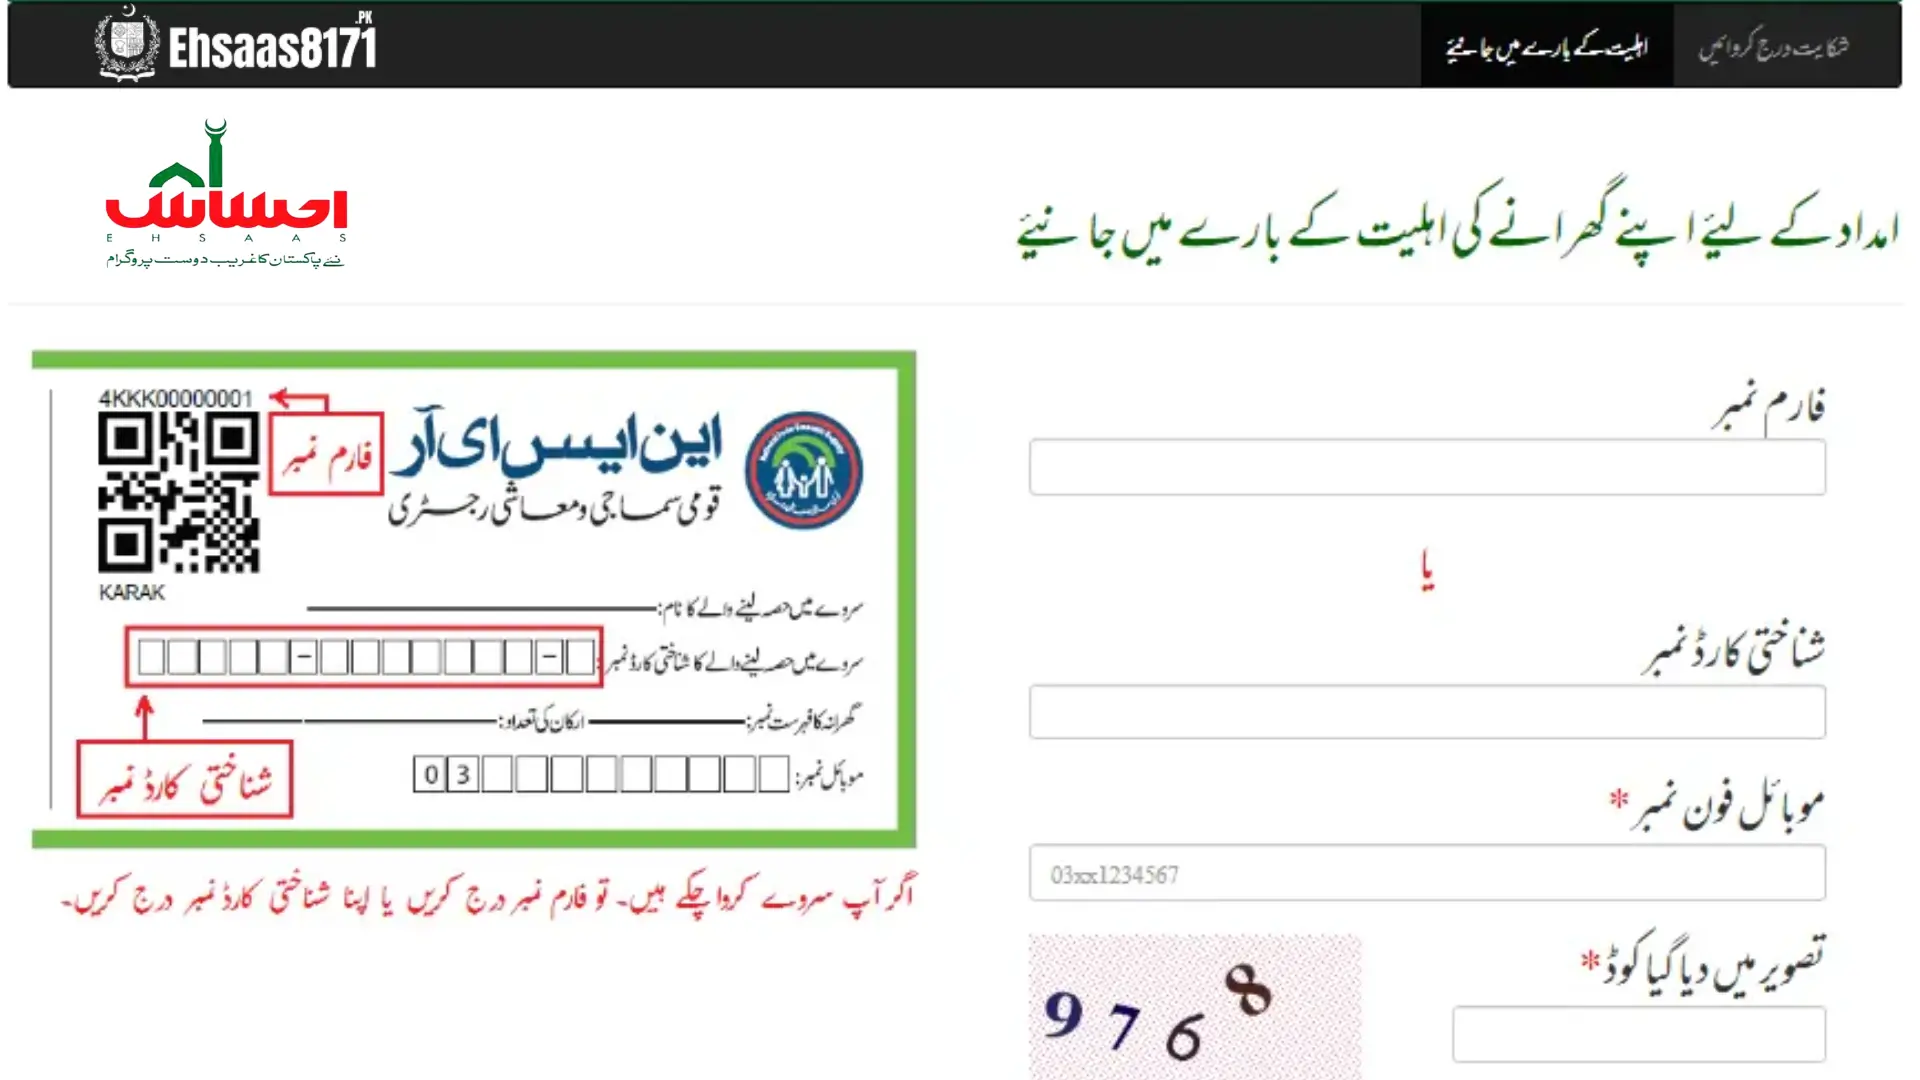 How To Register for Ehsaas Program